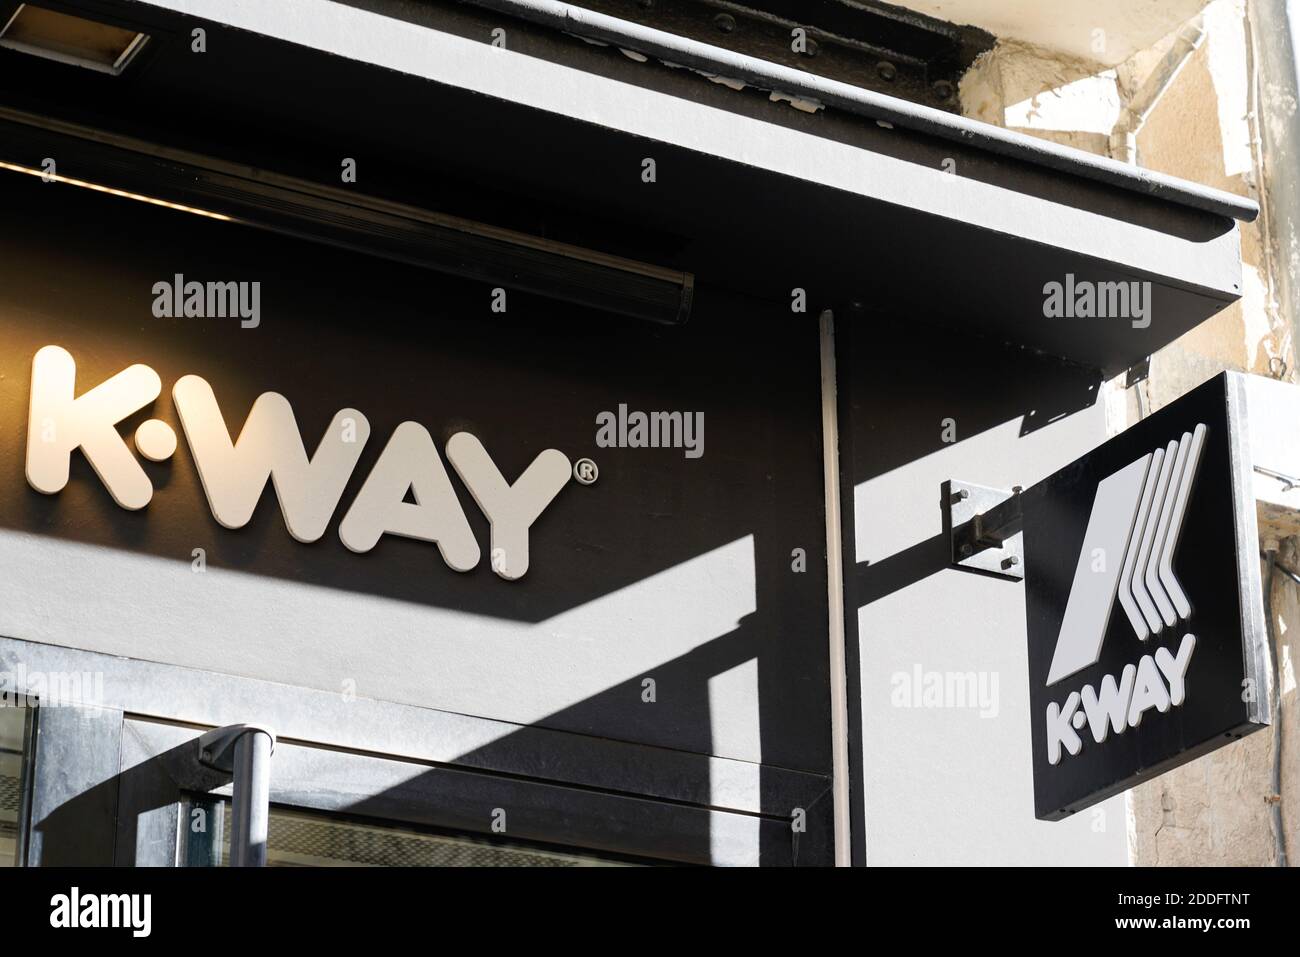 Bordeaux , Aquitaine / France - 11 08 2020 : k-way logo and text sign front  of french store clothing outlet raincoat and clothes rainproof shop Stock  Photo - Alamy